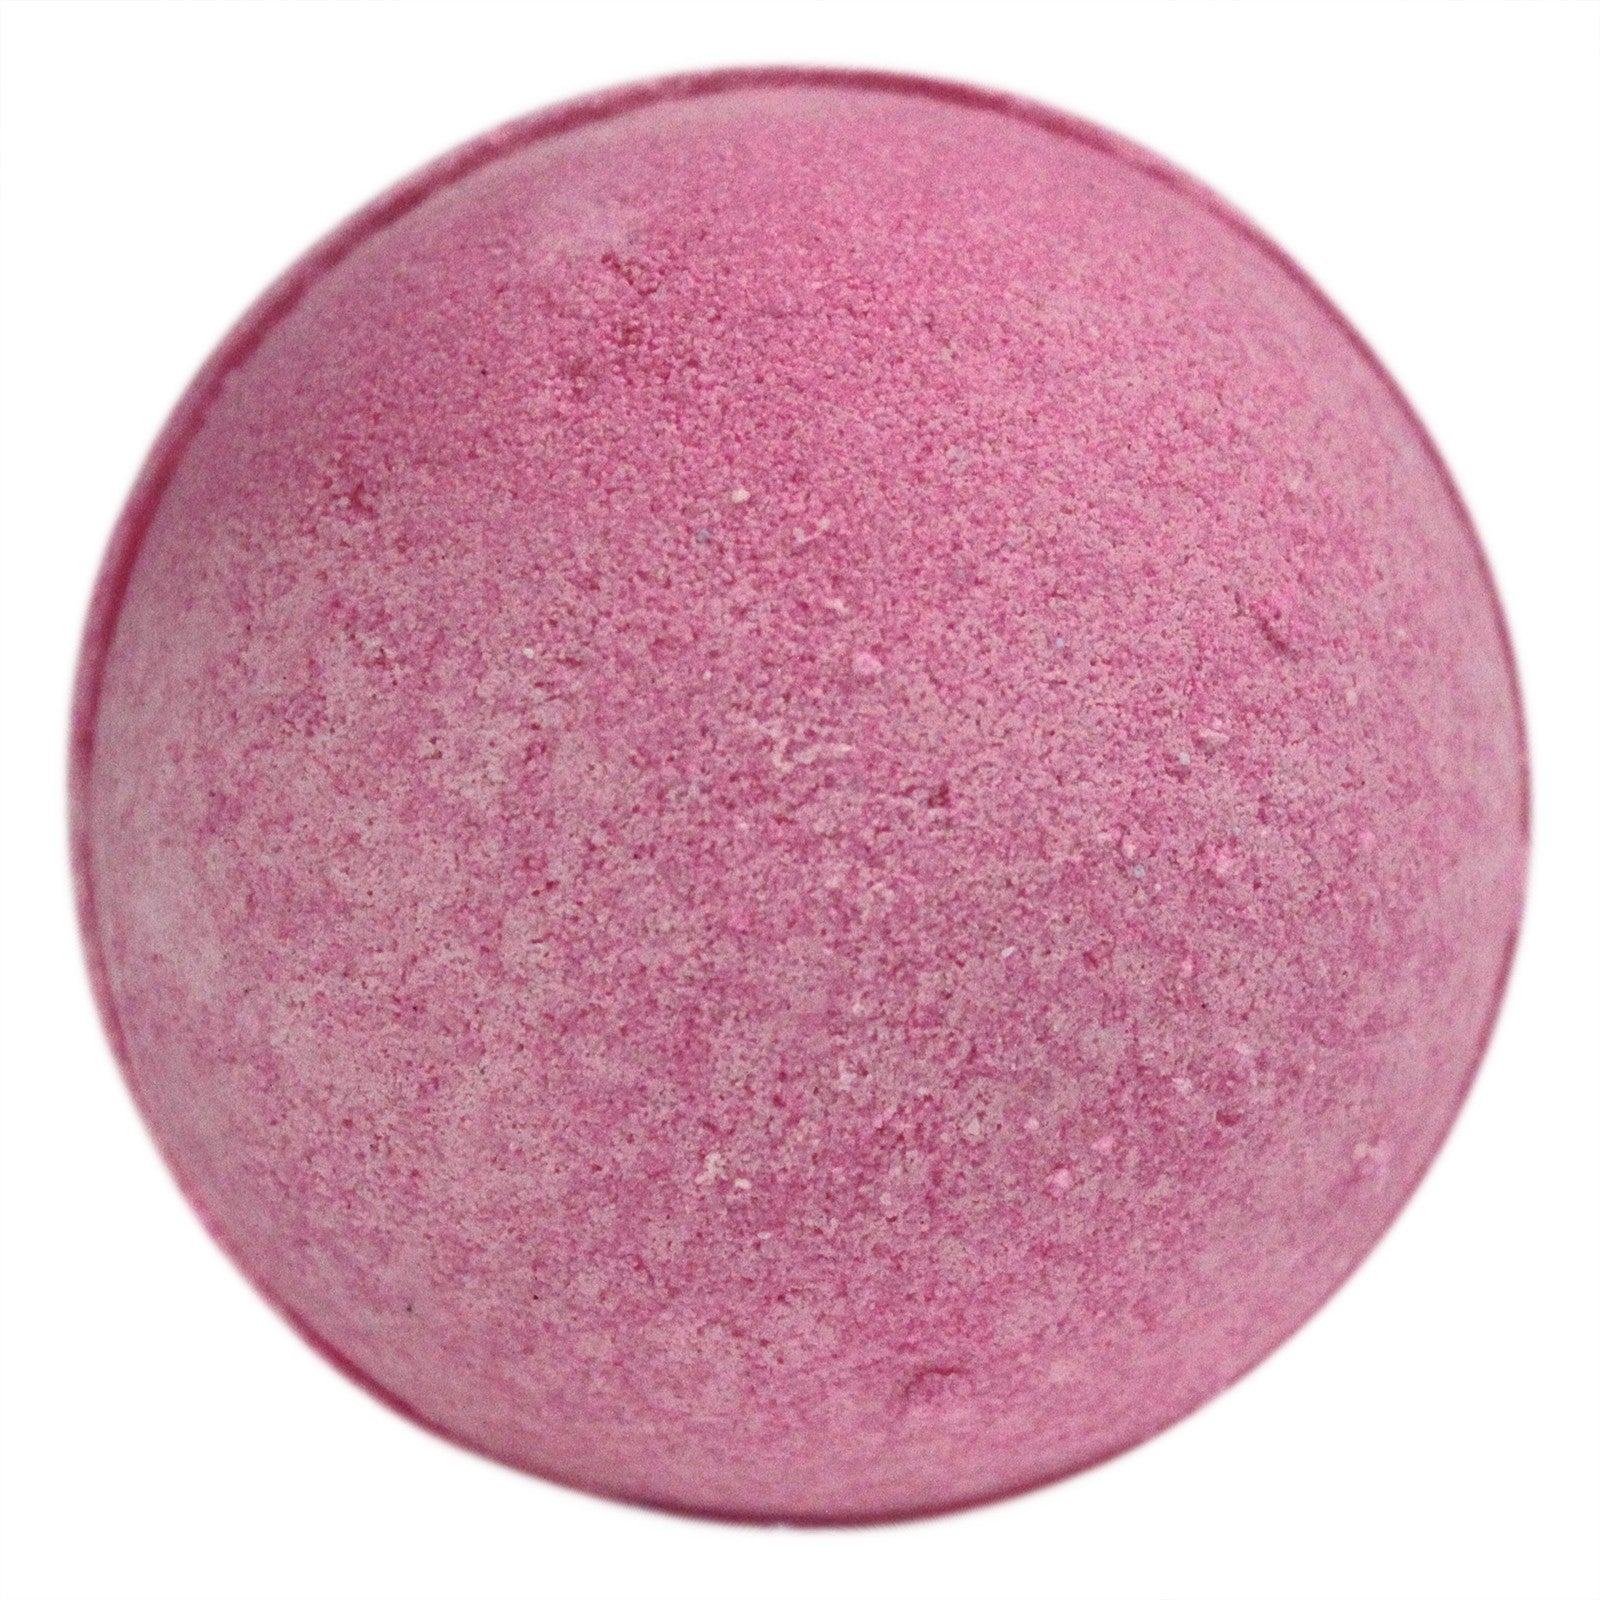 View Very Berry Bath Bomb information